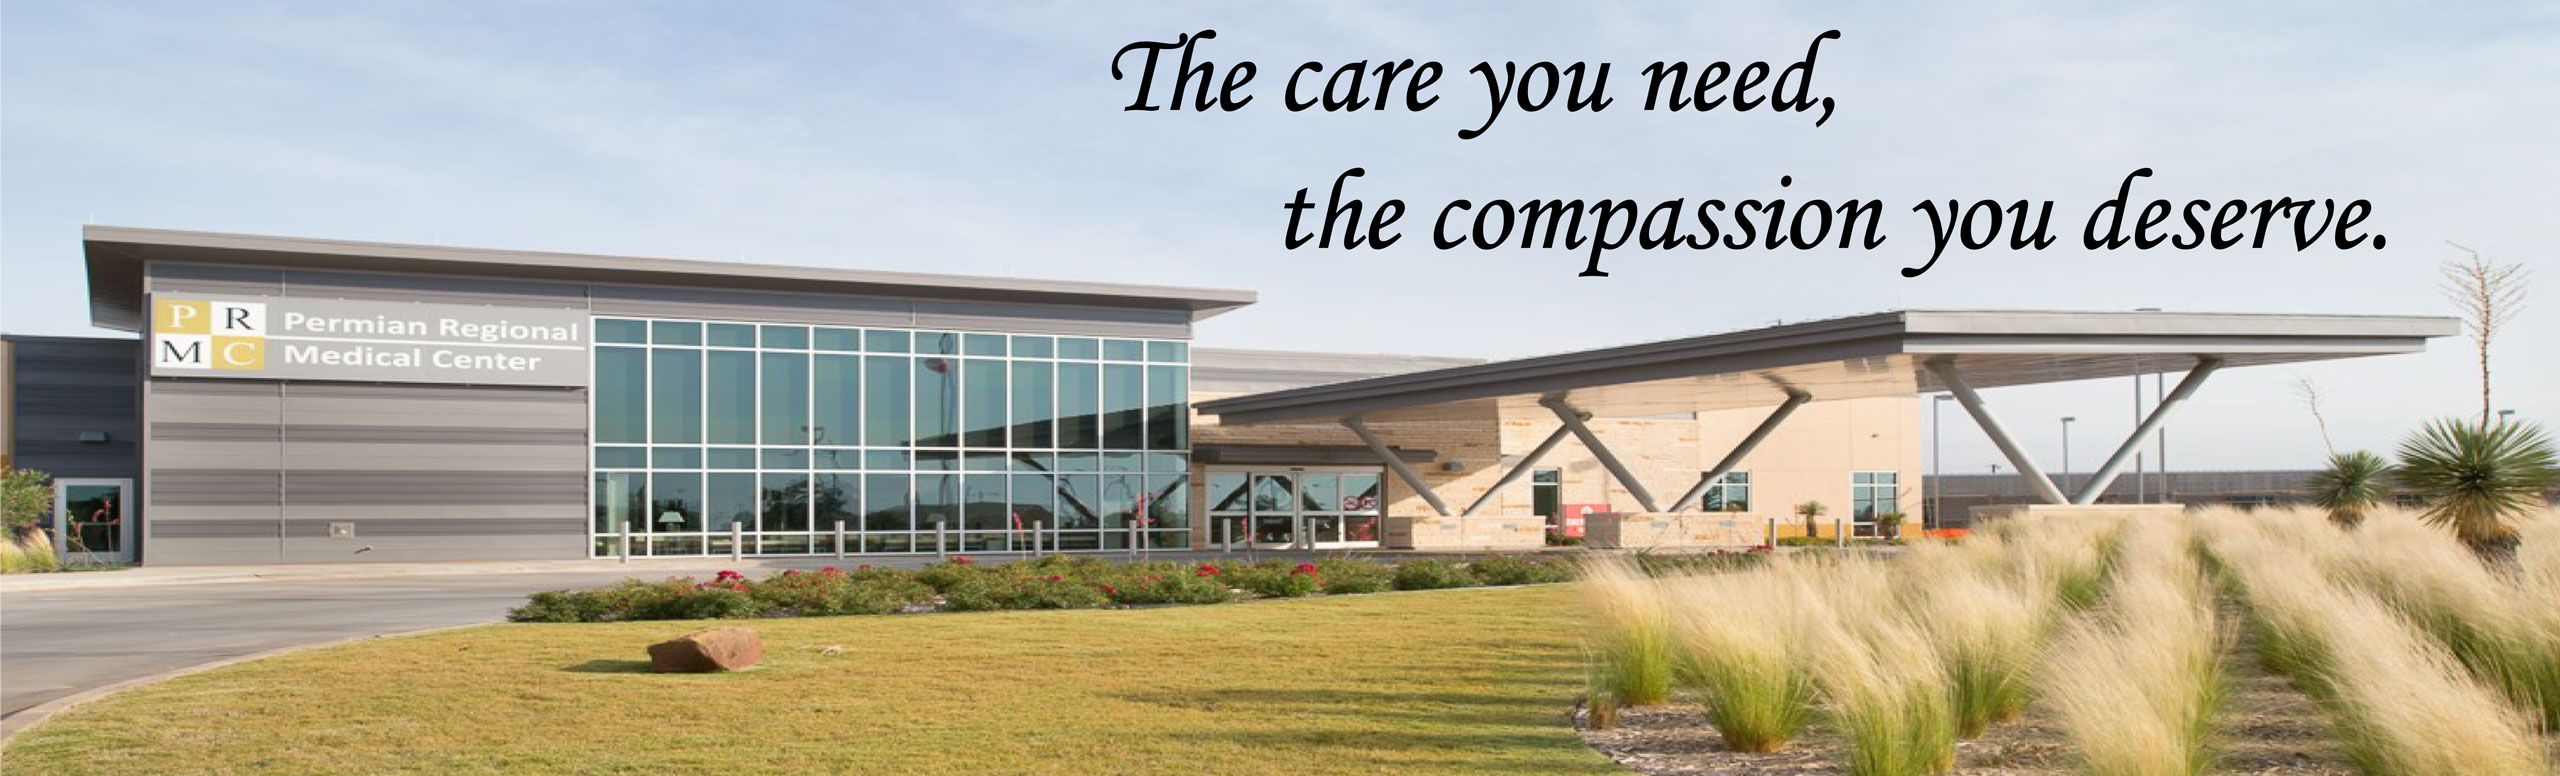 Banner picture of Permian Regional Medical Center. Banner says:
The care you need. the compassion you deserve.